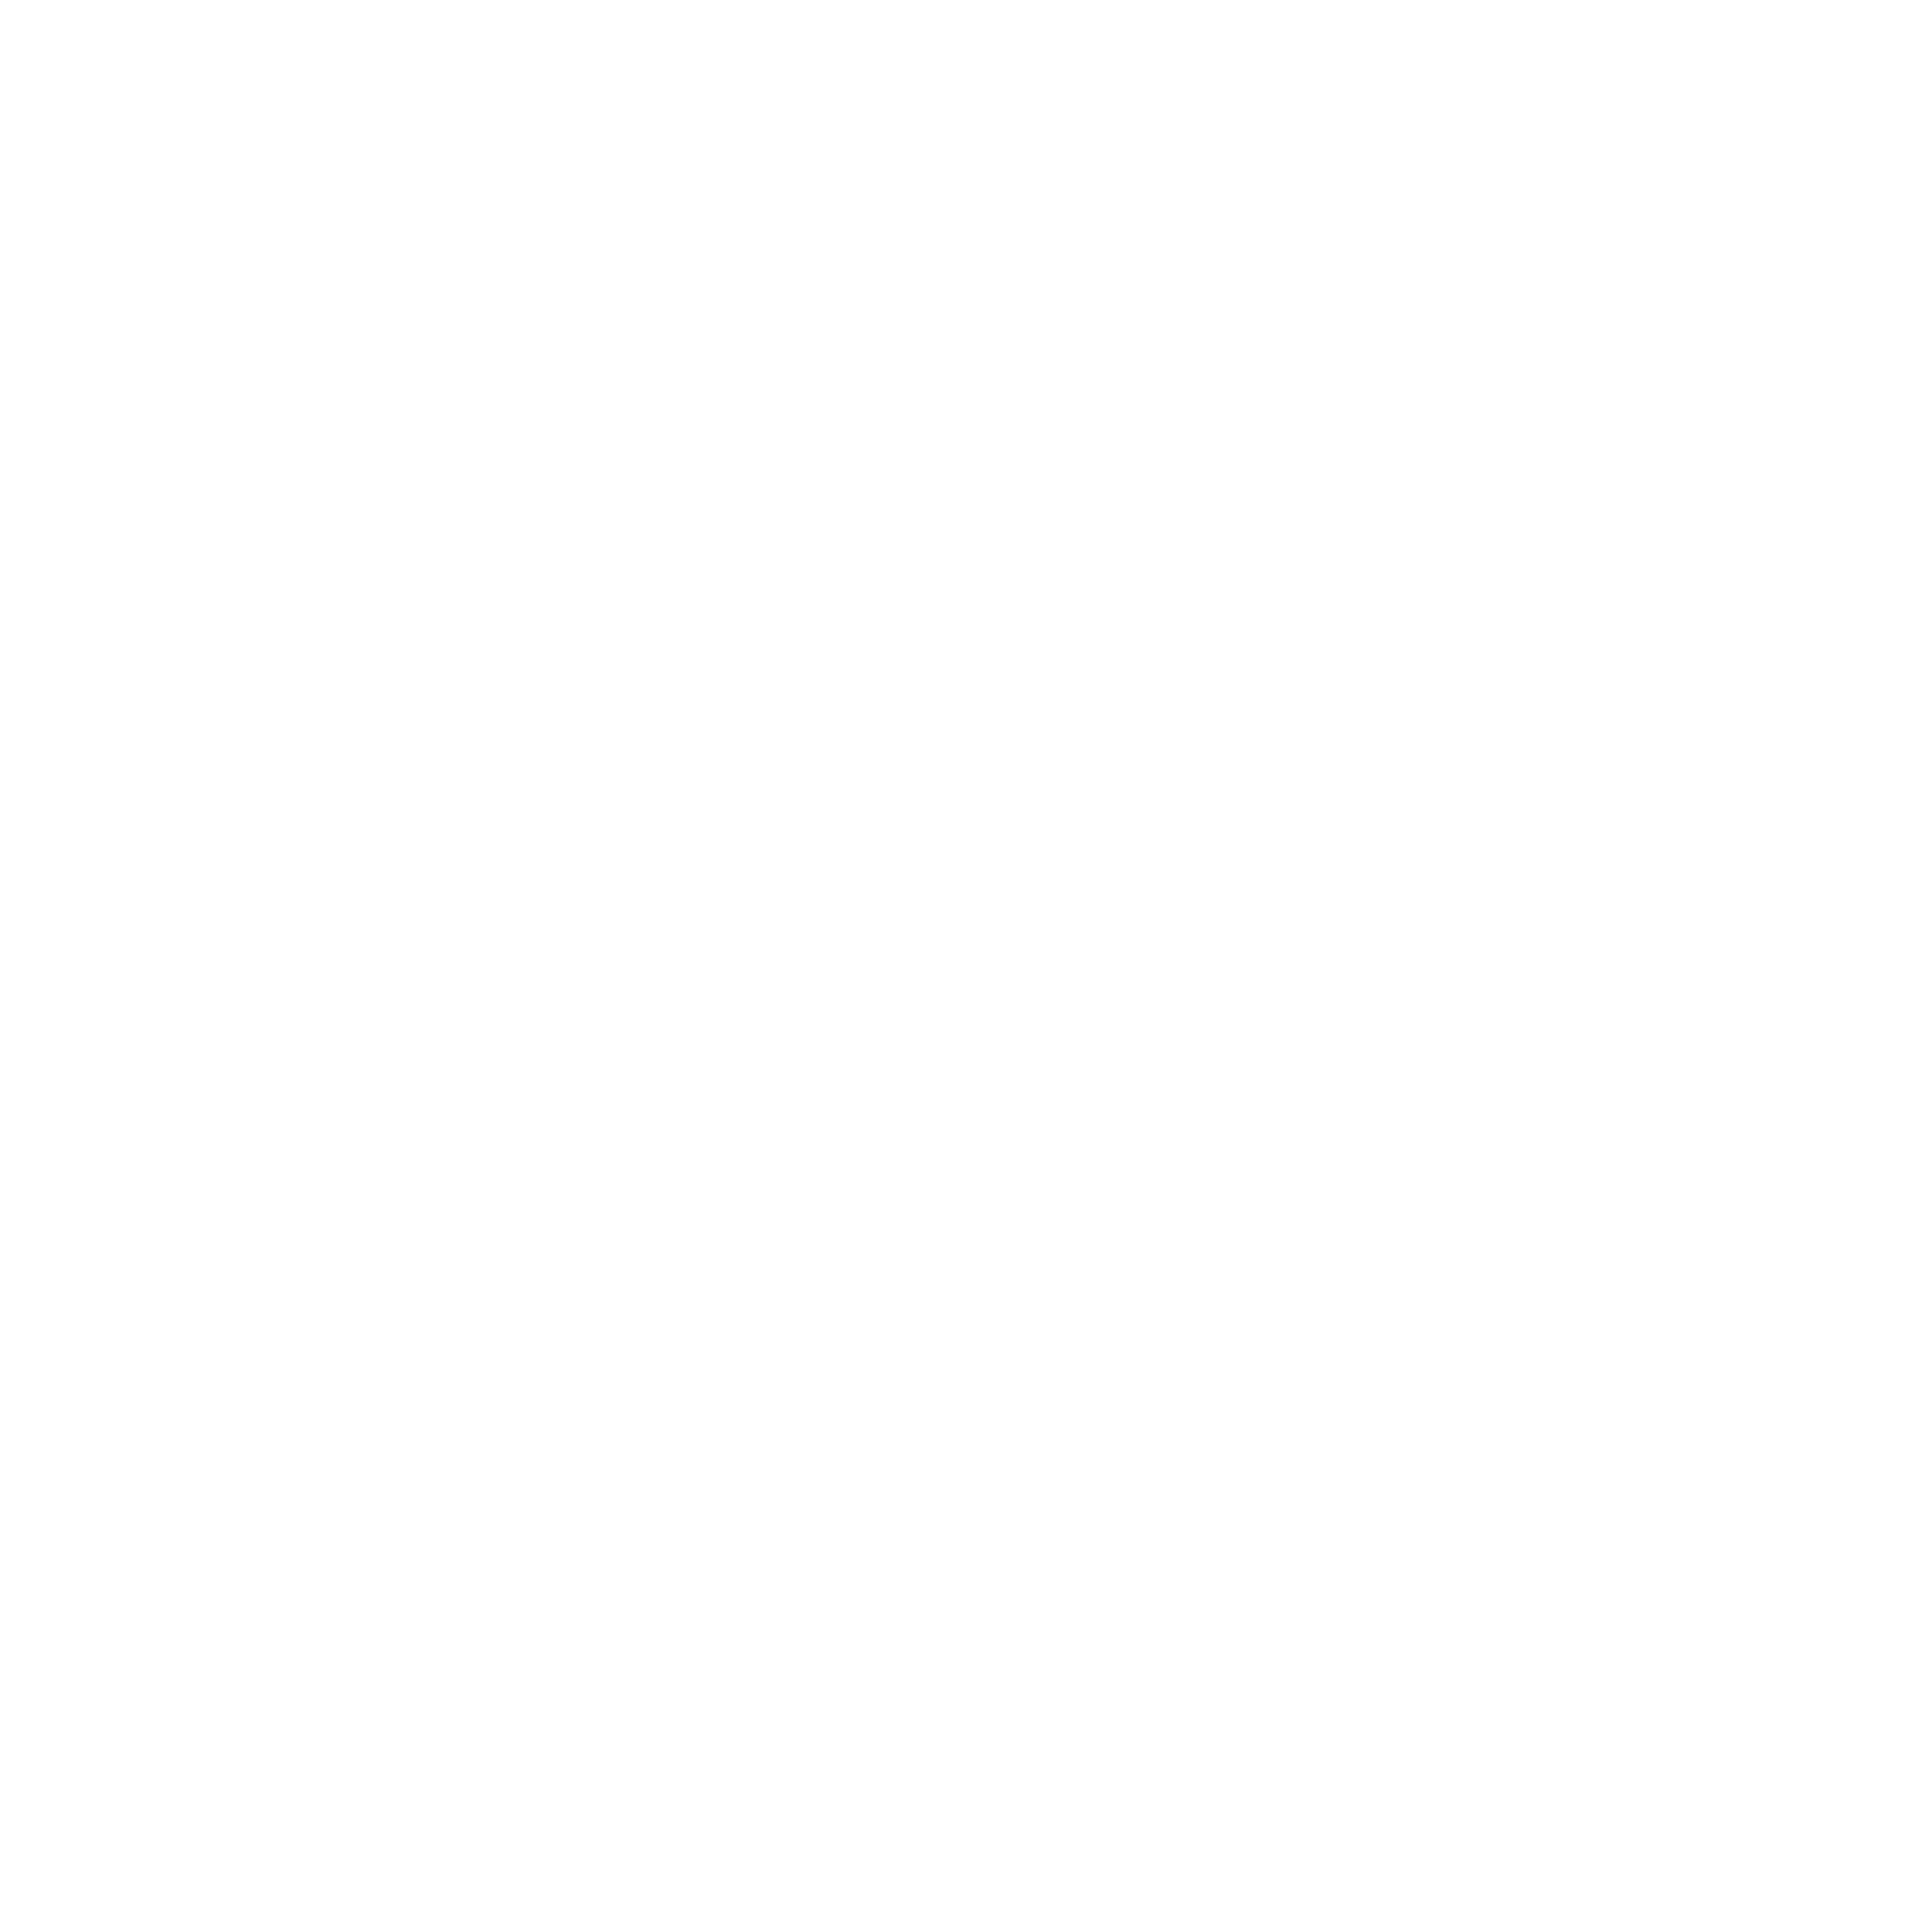 October 24, 2017 Dear Valued Customer: This letter is addressed to Mindray  NA contract customers regarding the discontinuation o